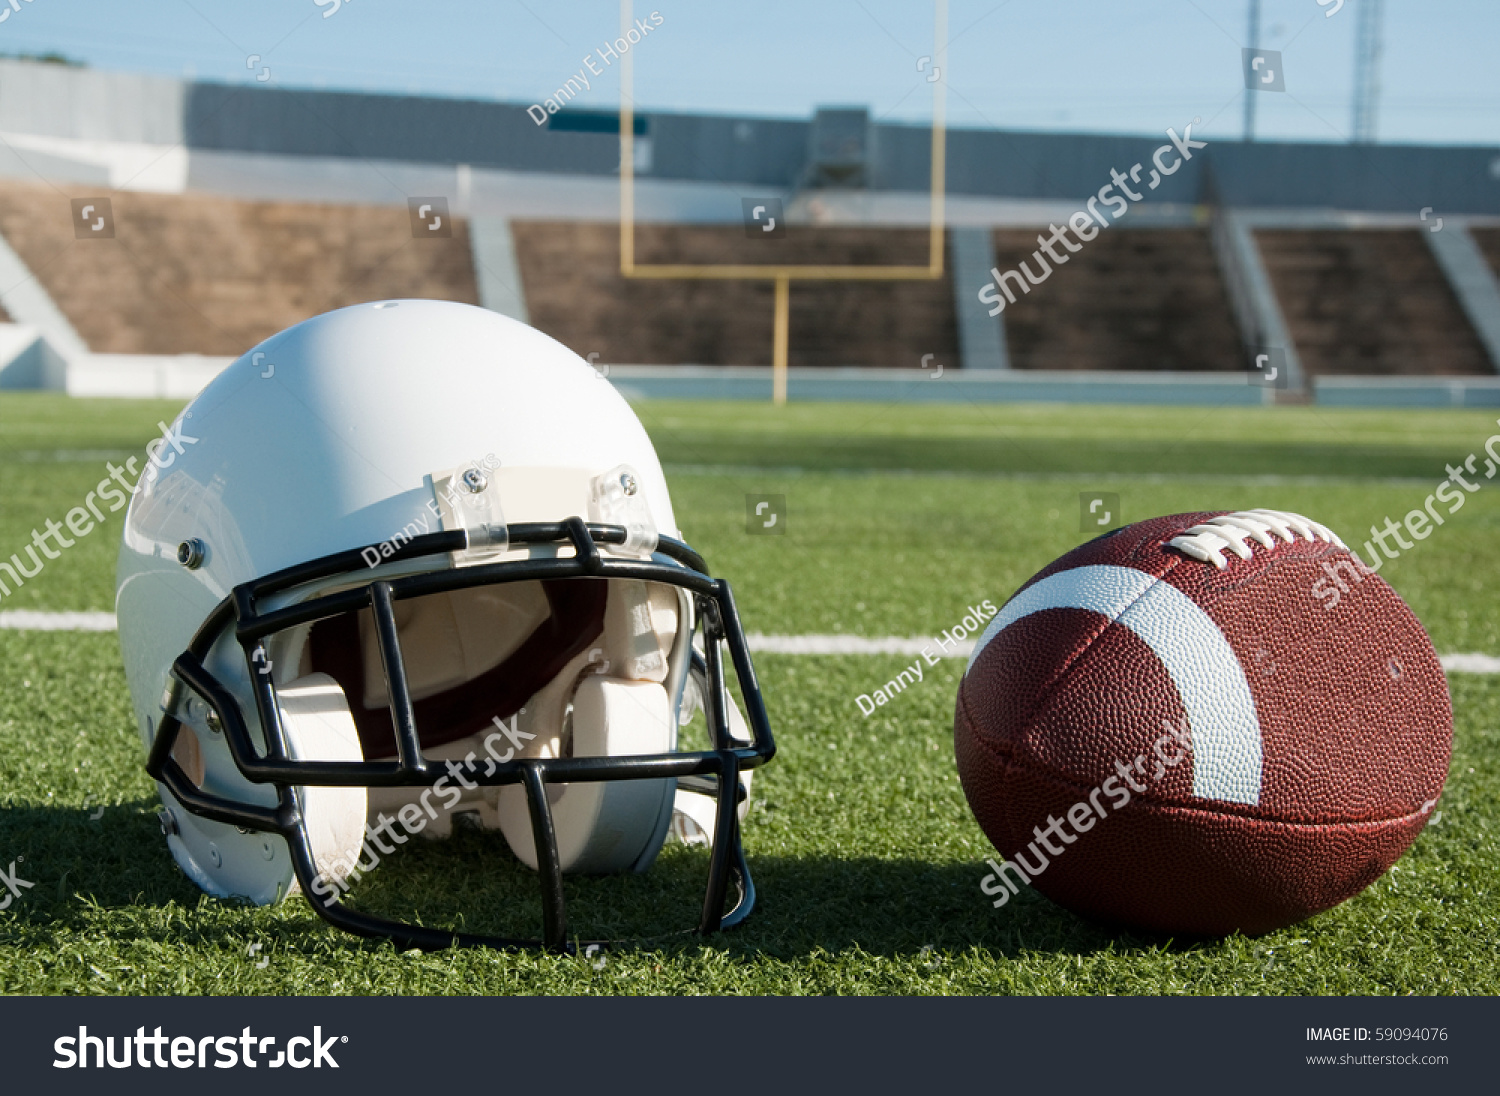 American Football And Helmet On Field With Goal Post In ...